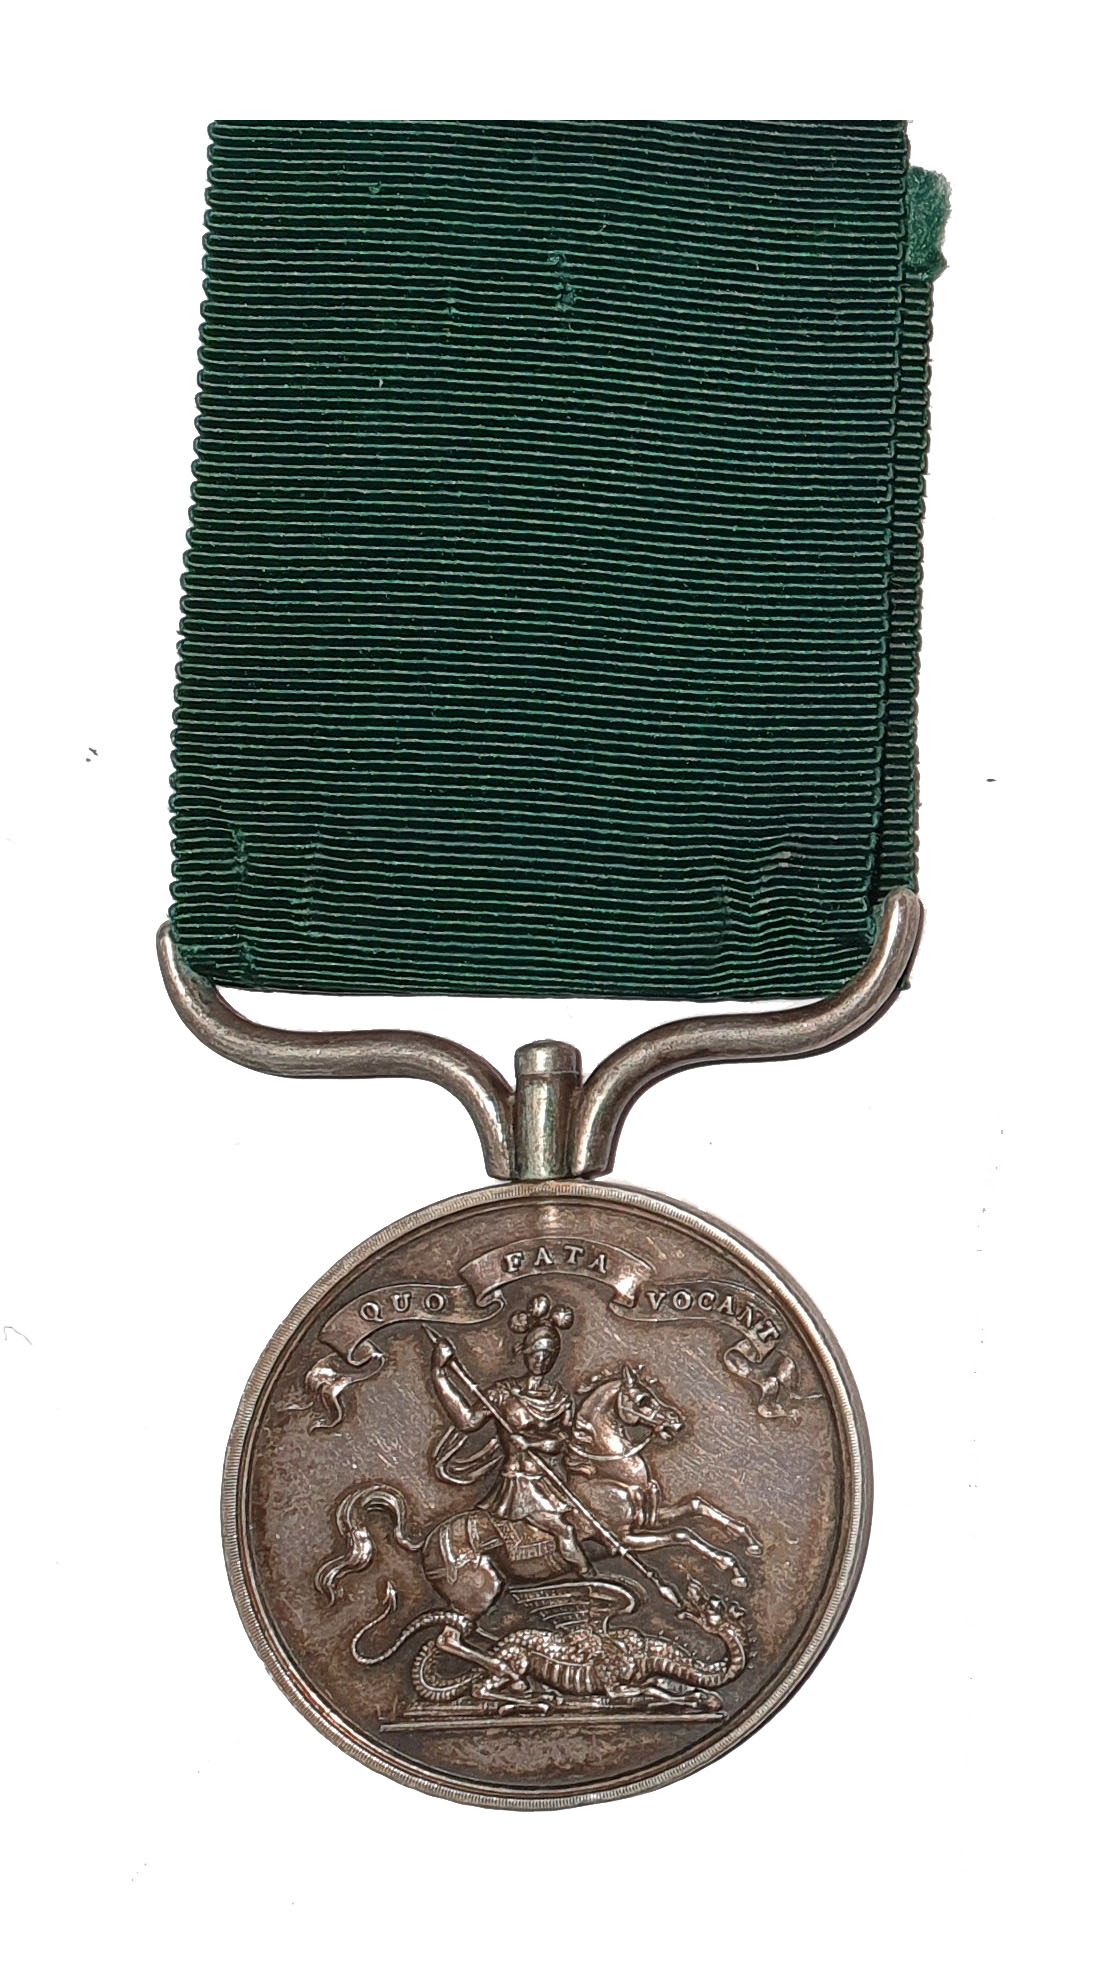 5th Foot Order of Merit Medal 1805 or later